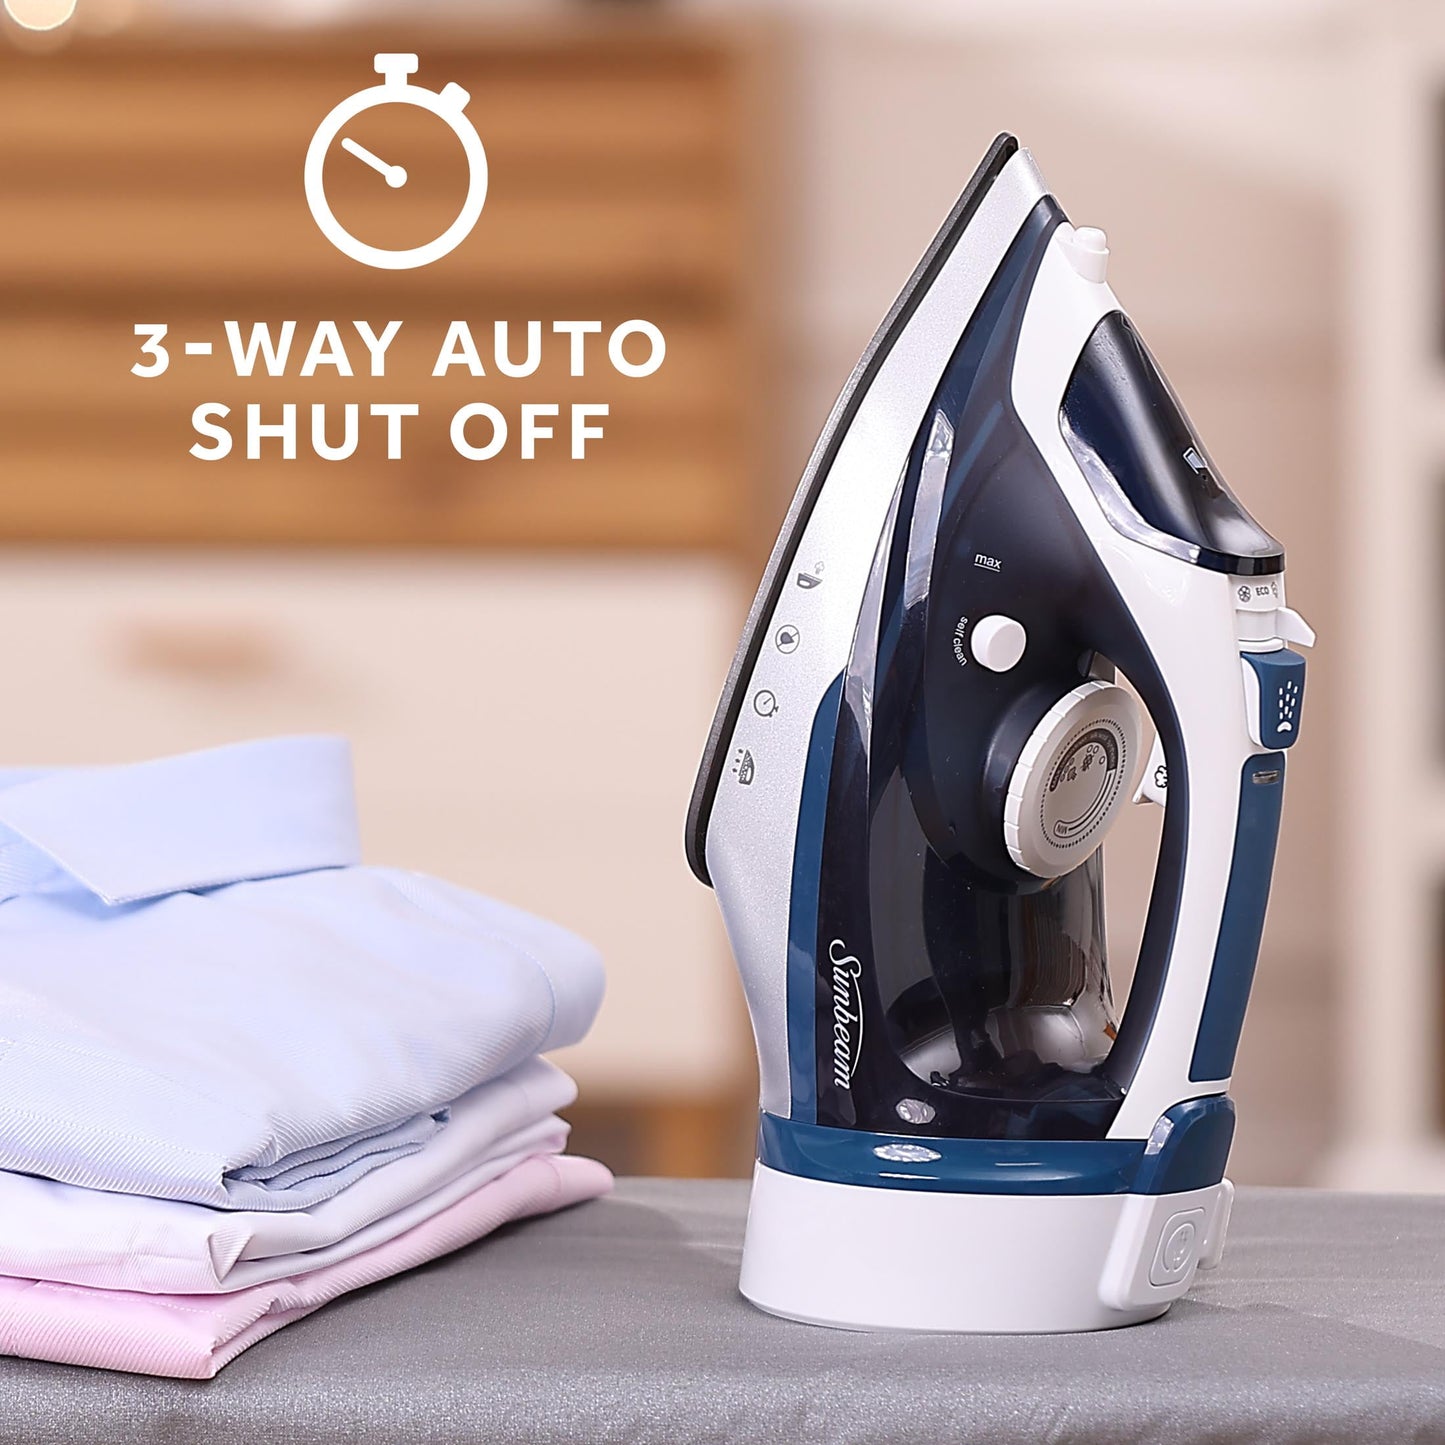 Sunbeam 1700W Steam Iron, Retractable Cord, Shot of Steam Feature, Blue and White Finish